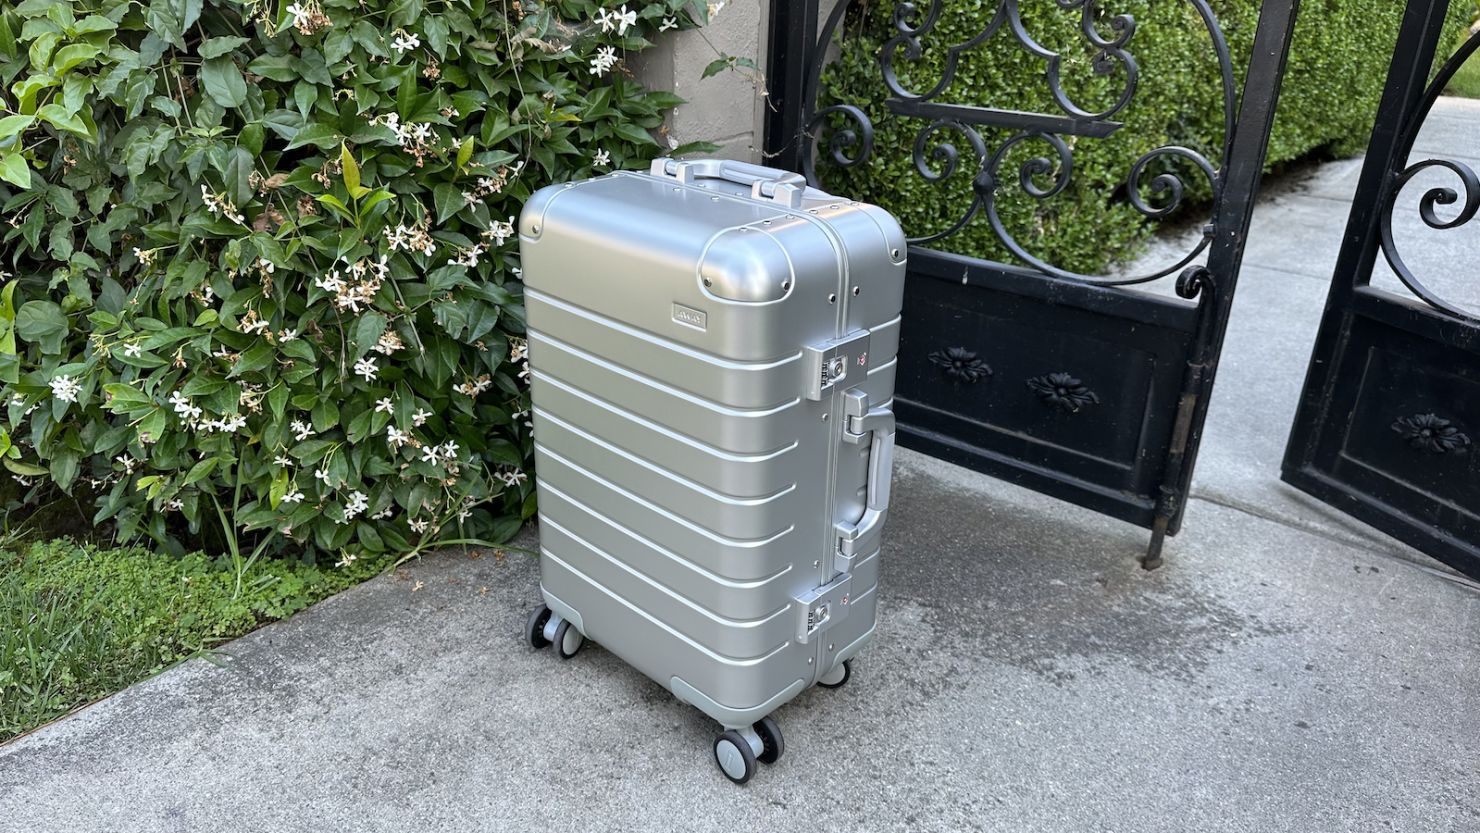 Away Luggage Review 2023